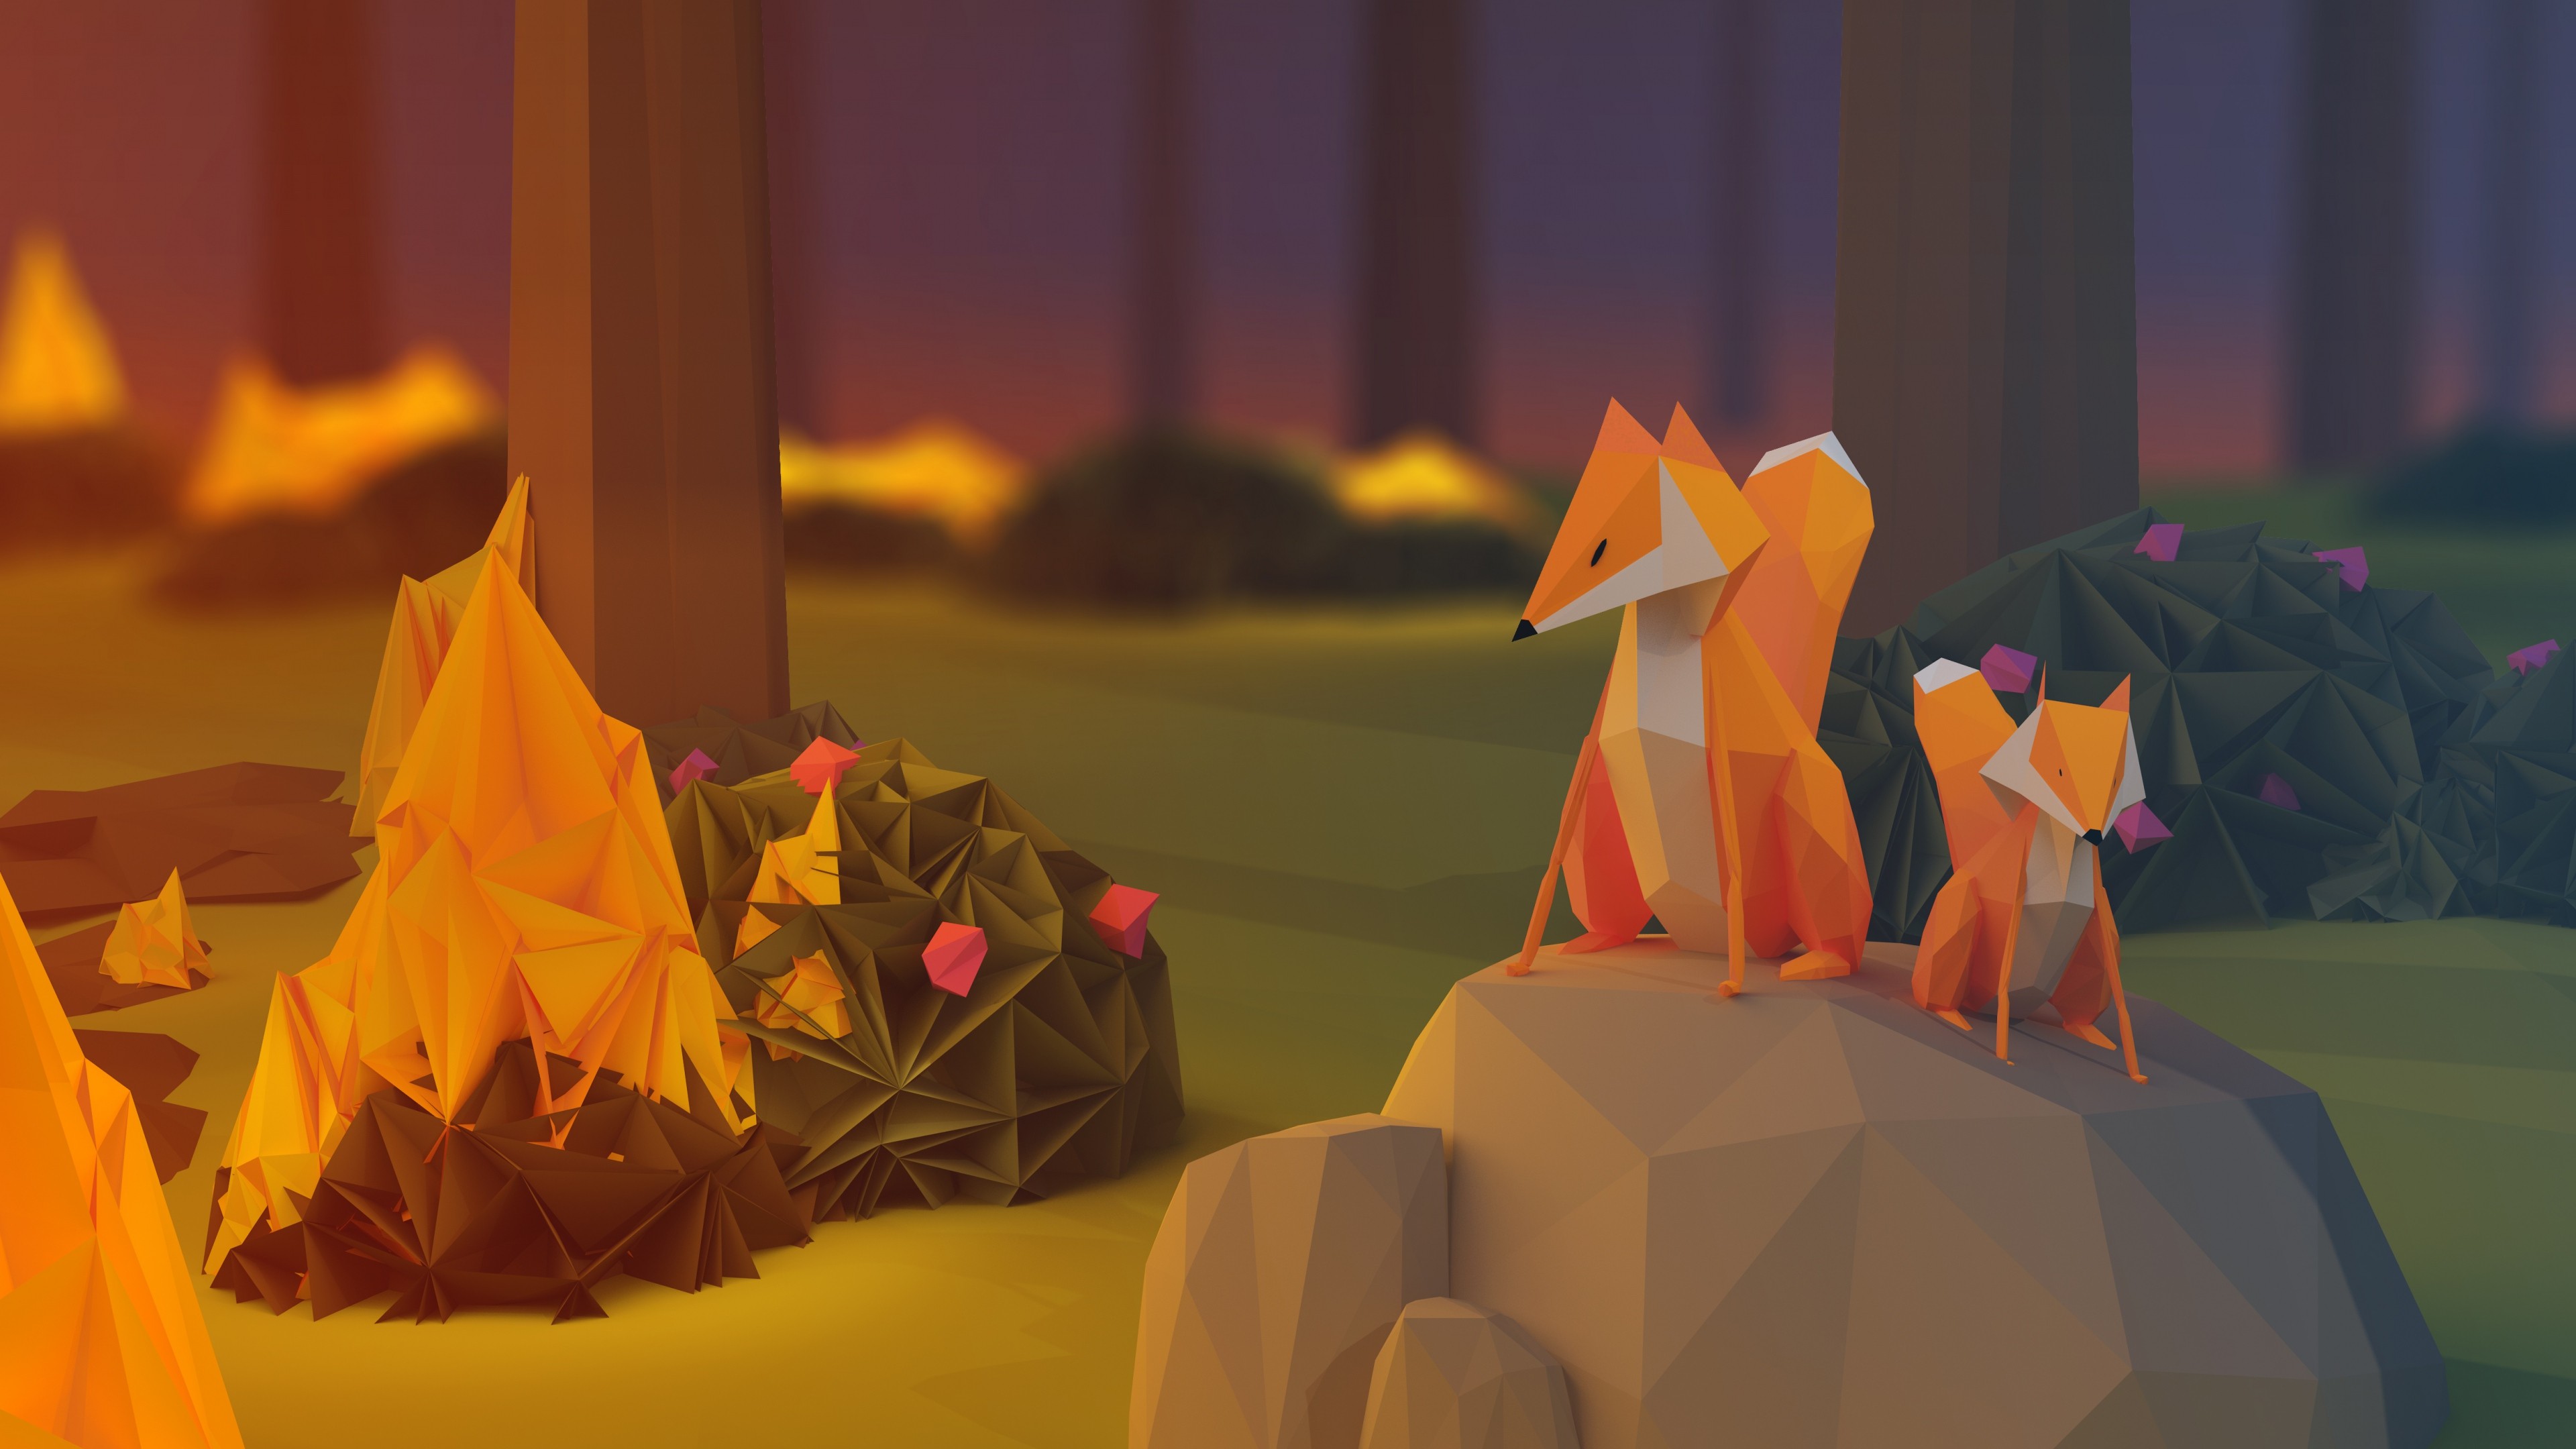 General 3840x2160 digital art fox low poly animals nature paper poly fire mammals rocks stones plants trees flowers baby animals